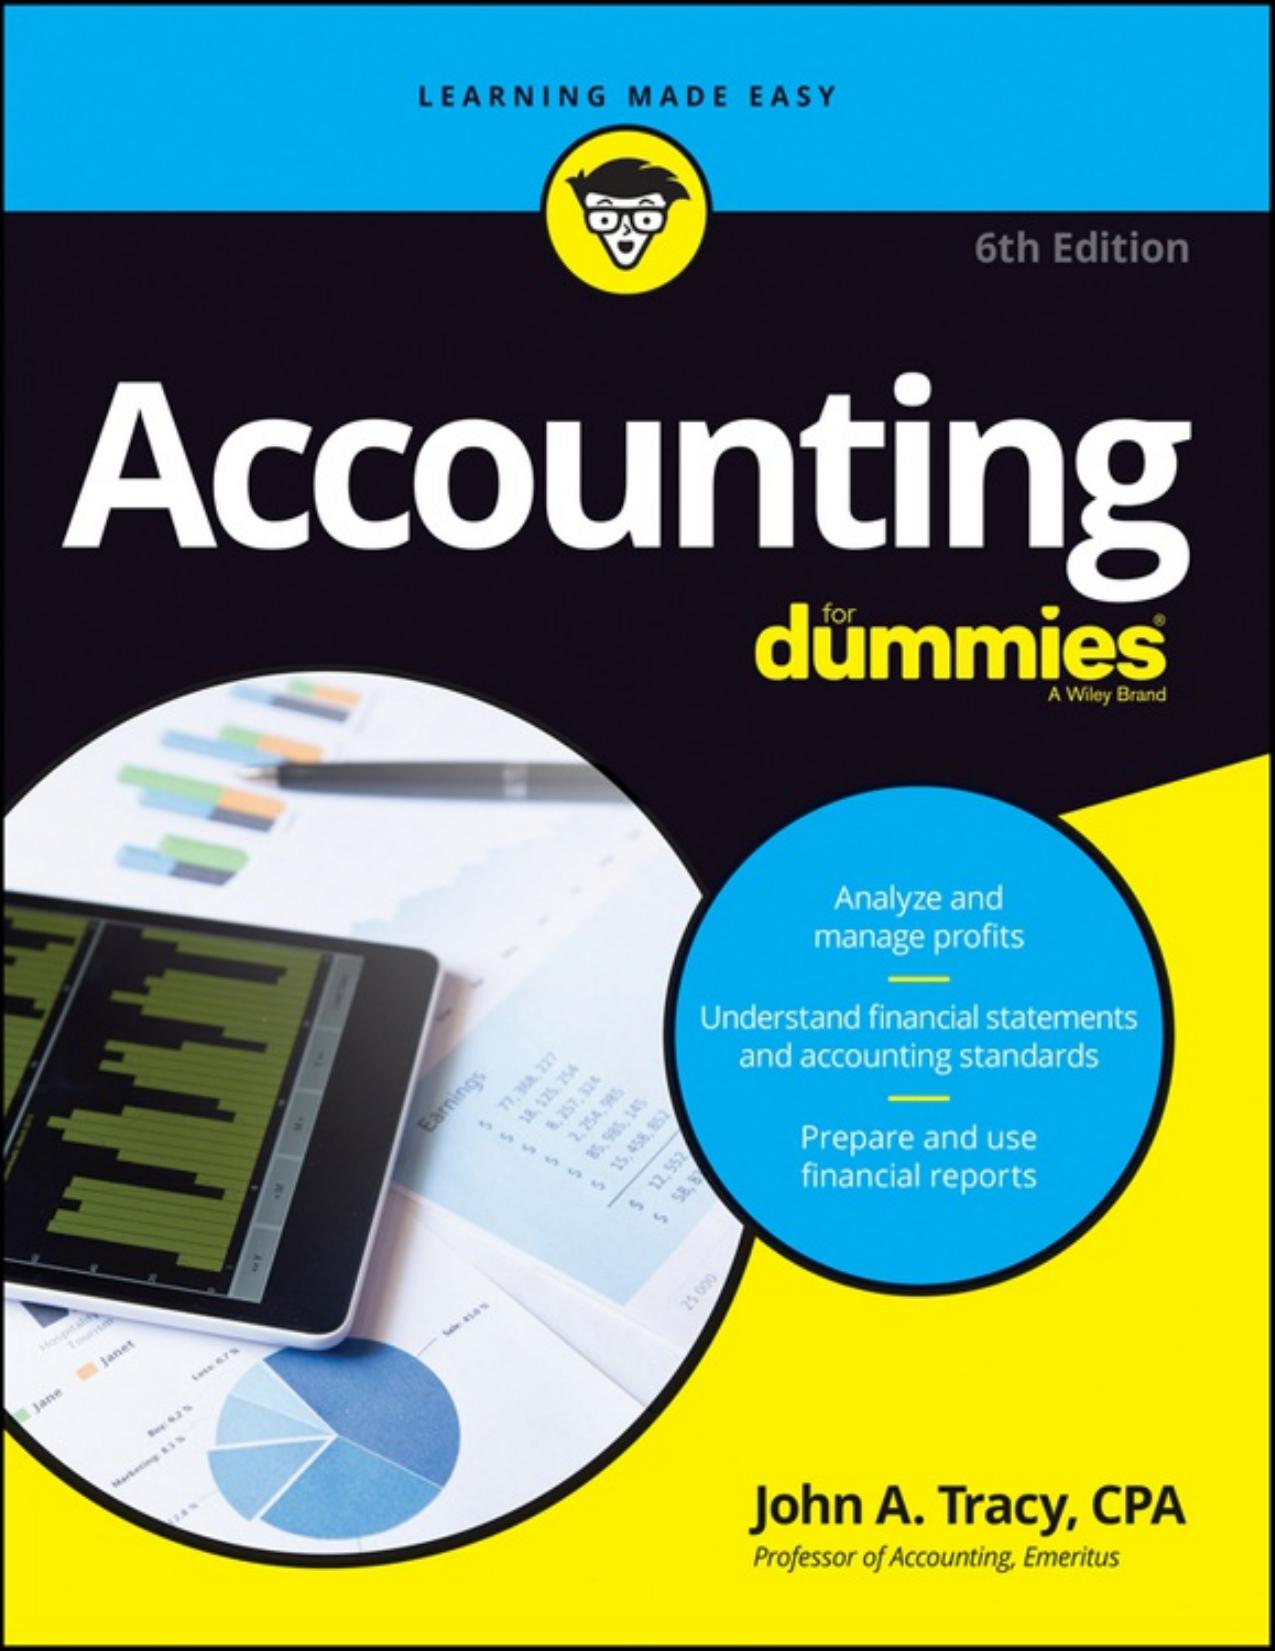 Accounting for Dummies by John A. Tracy